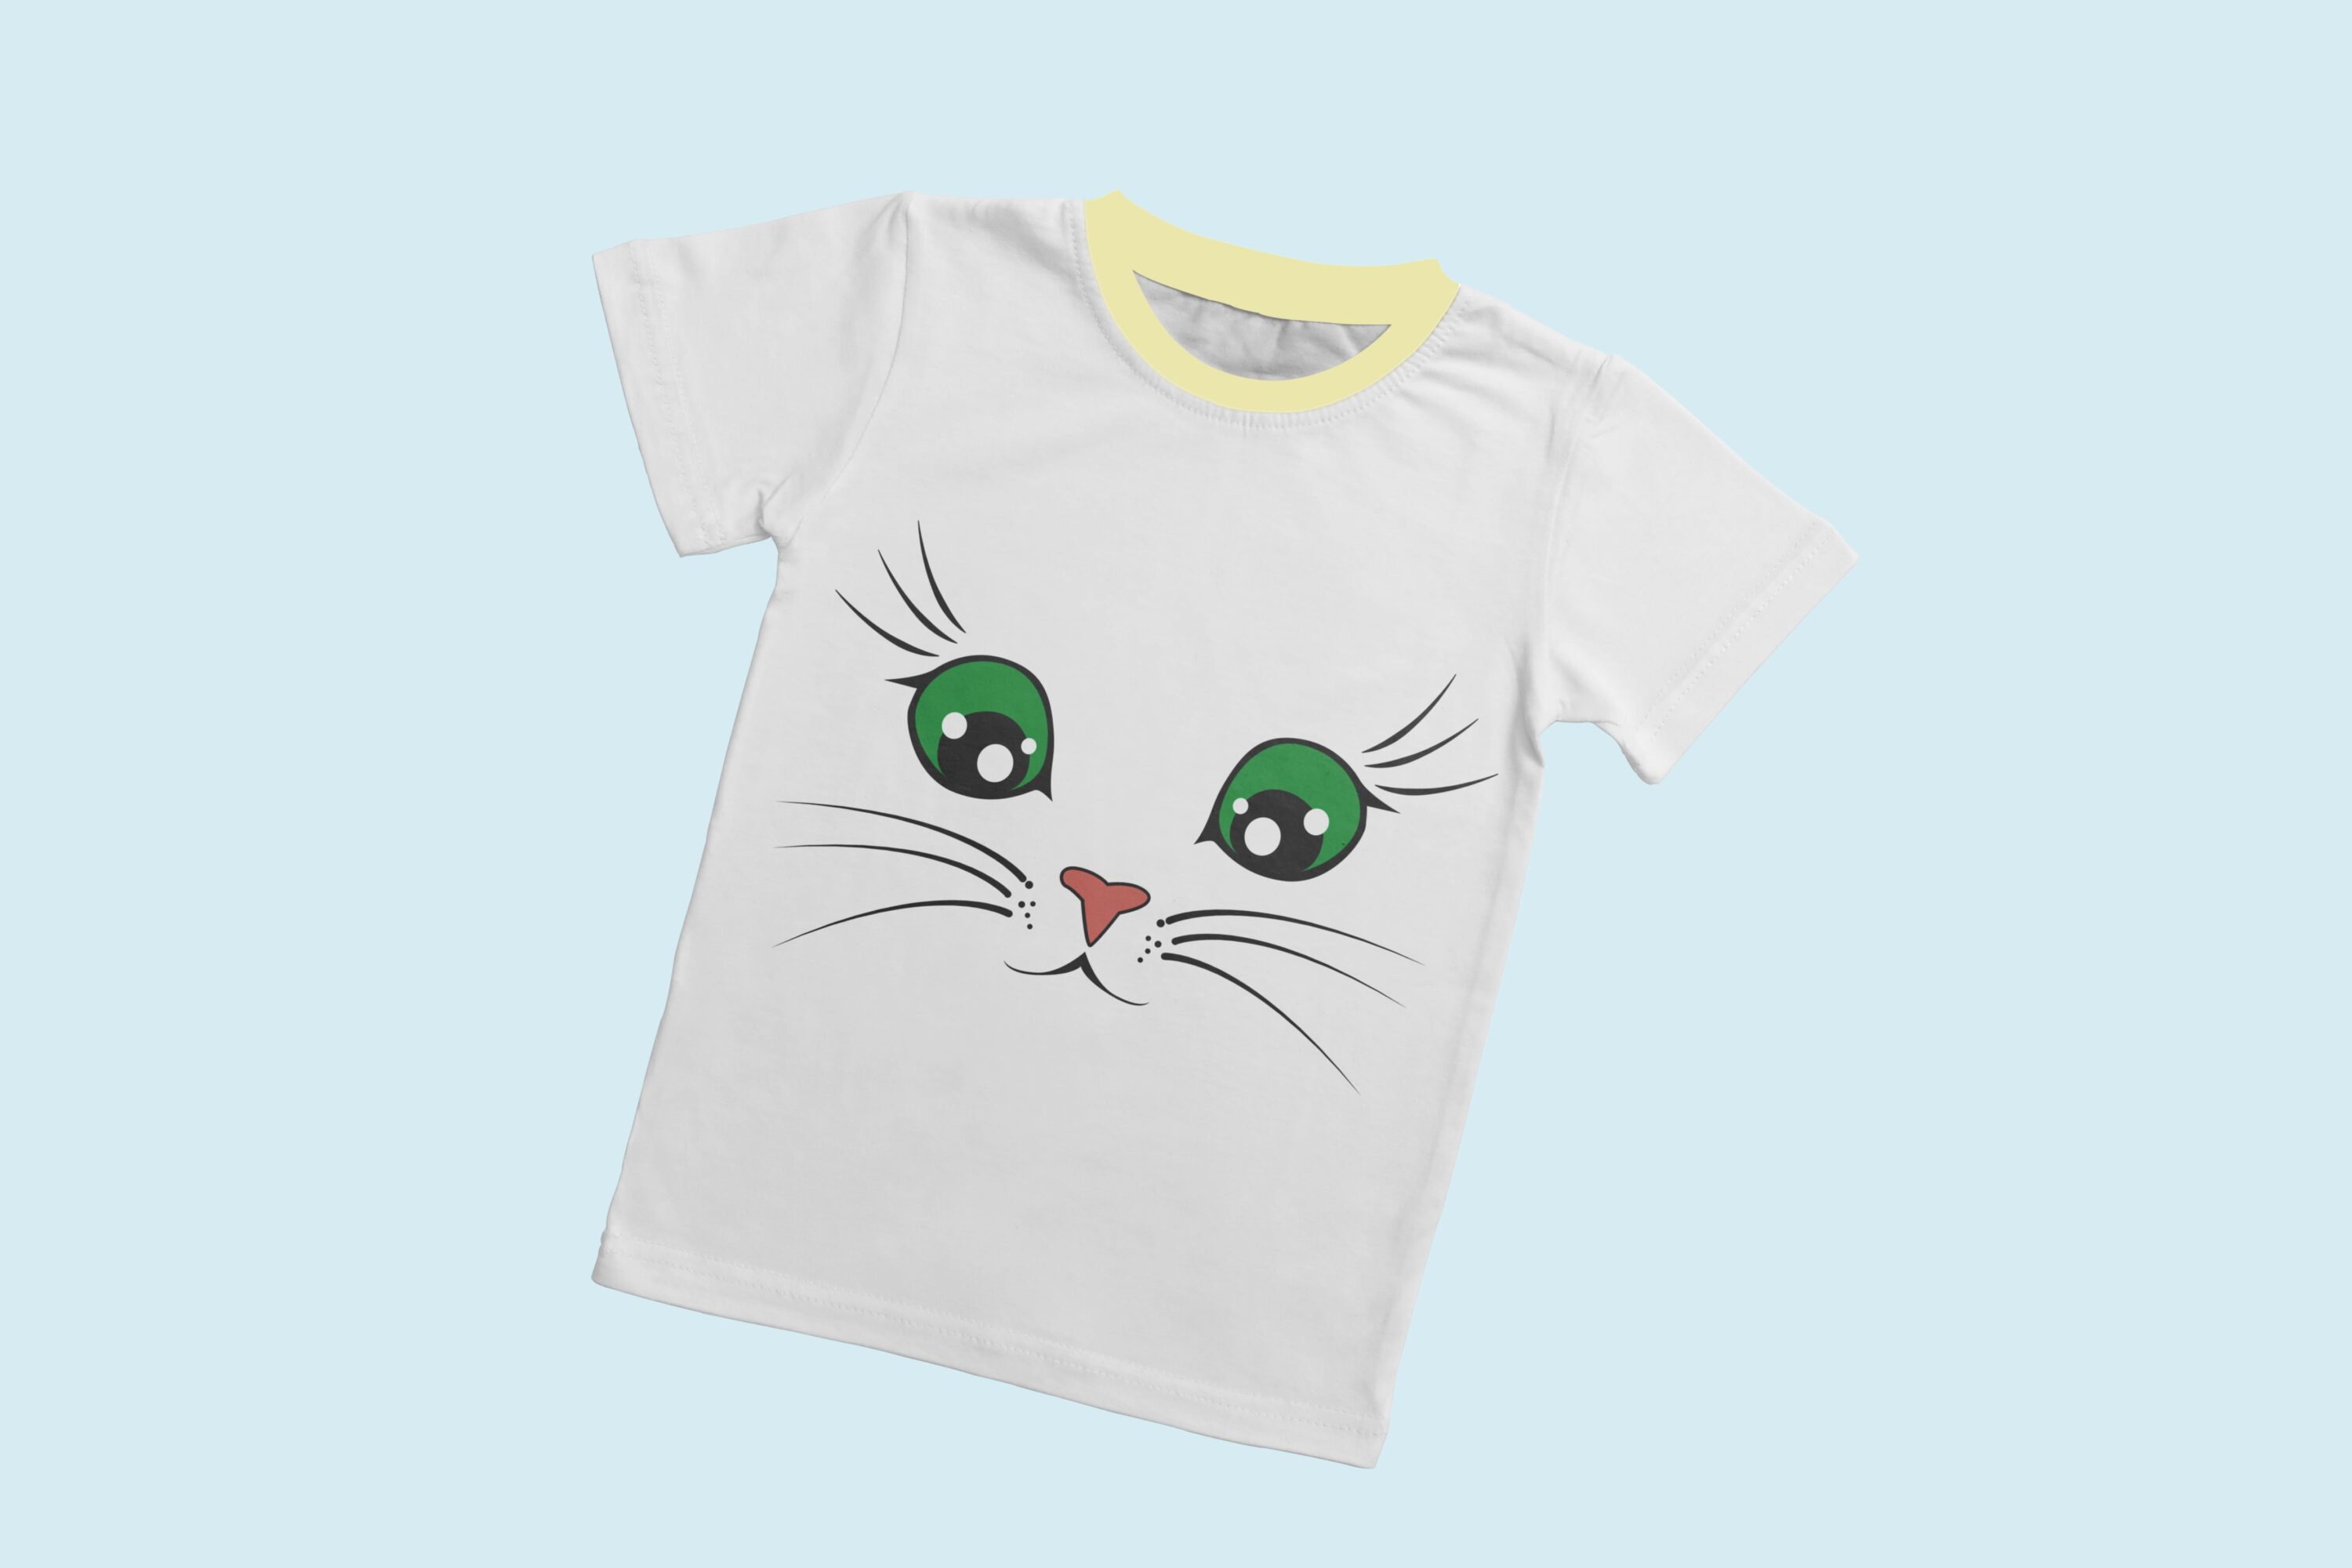 A white T-shirt with a light yellow collar and the face of an admiring cat with green eyes.